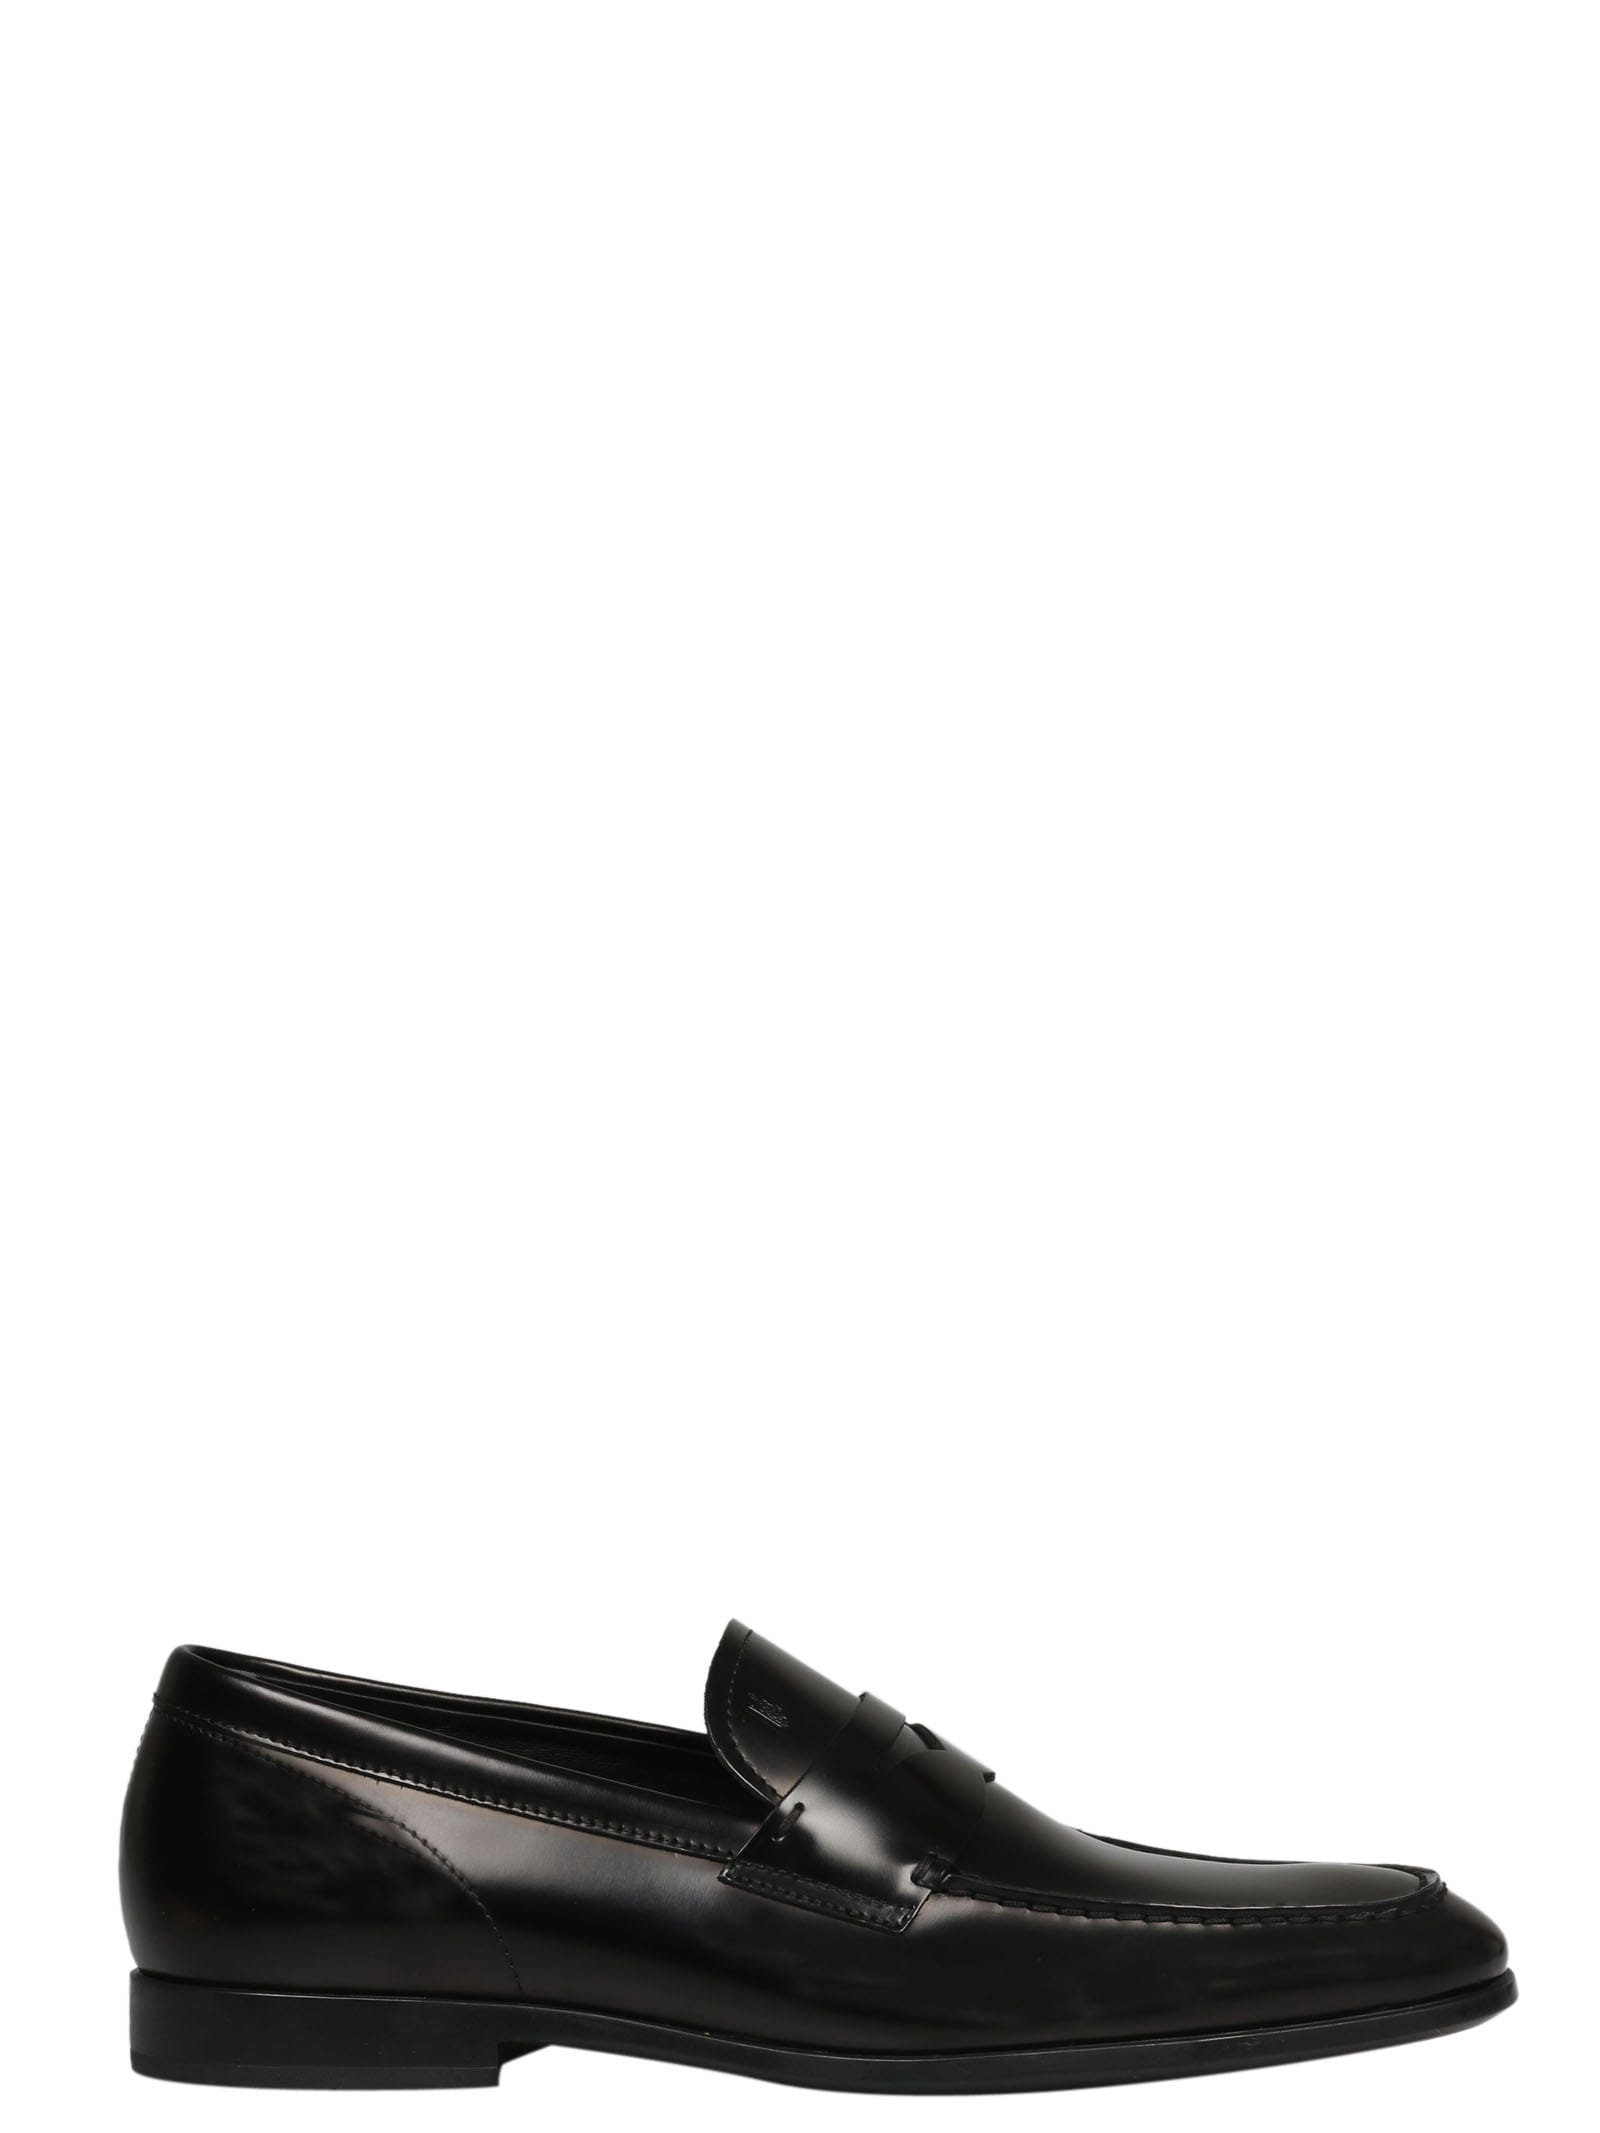 Tods Shiny Leather Loafers